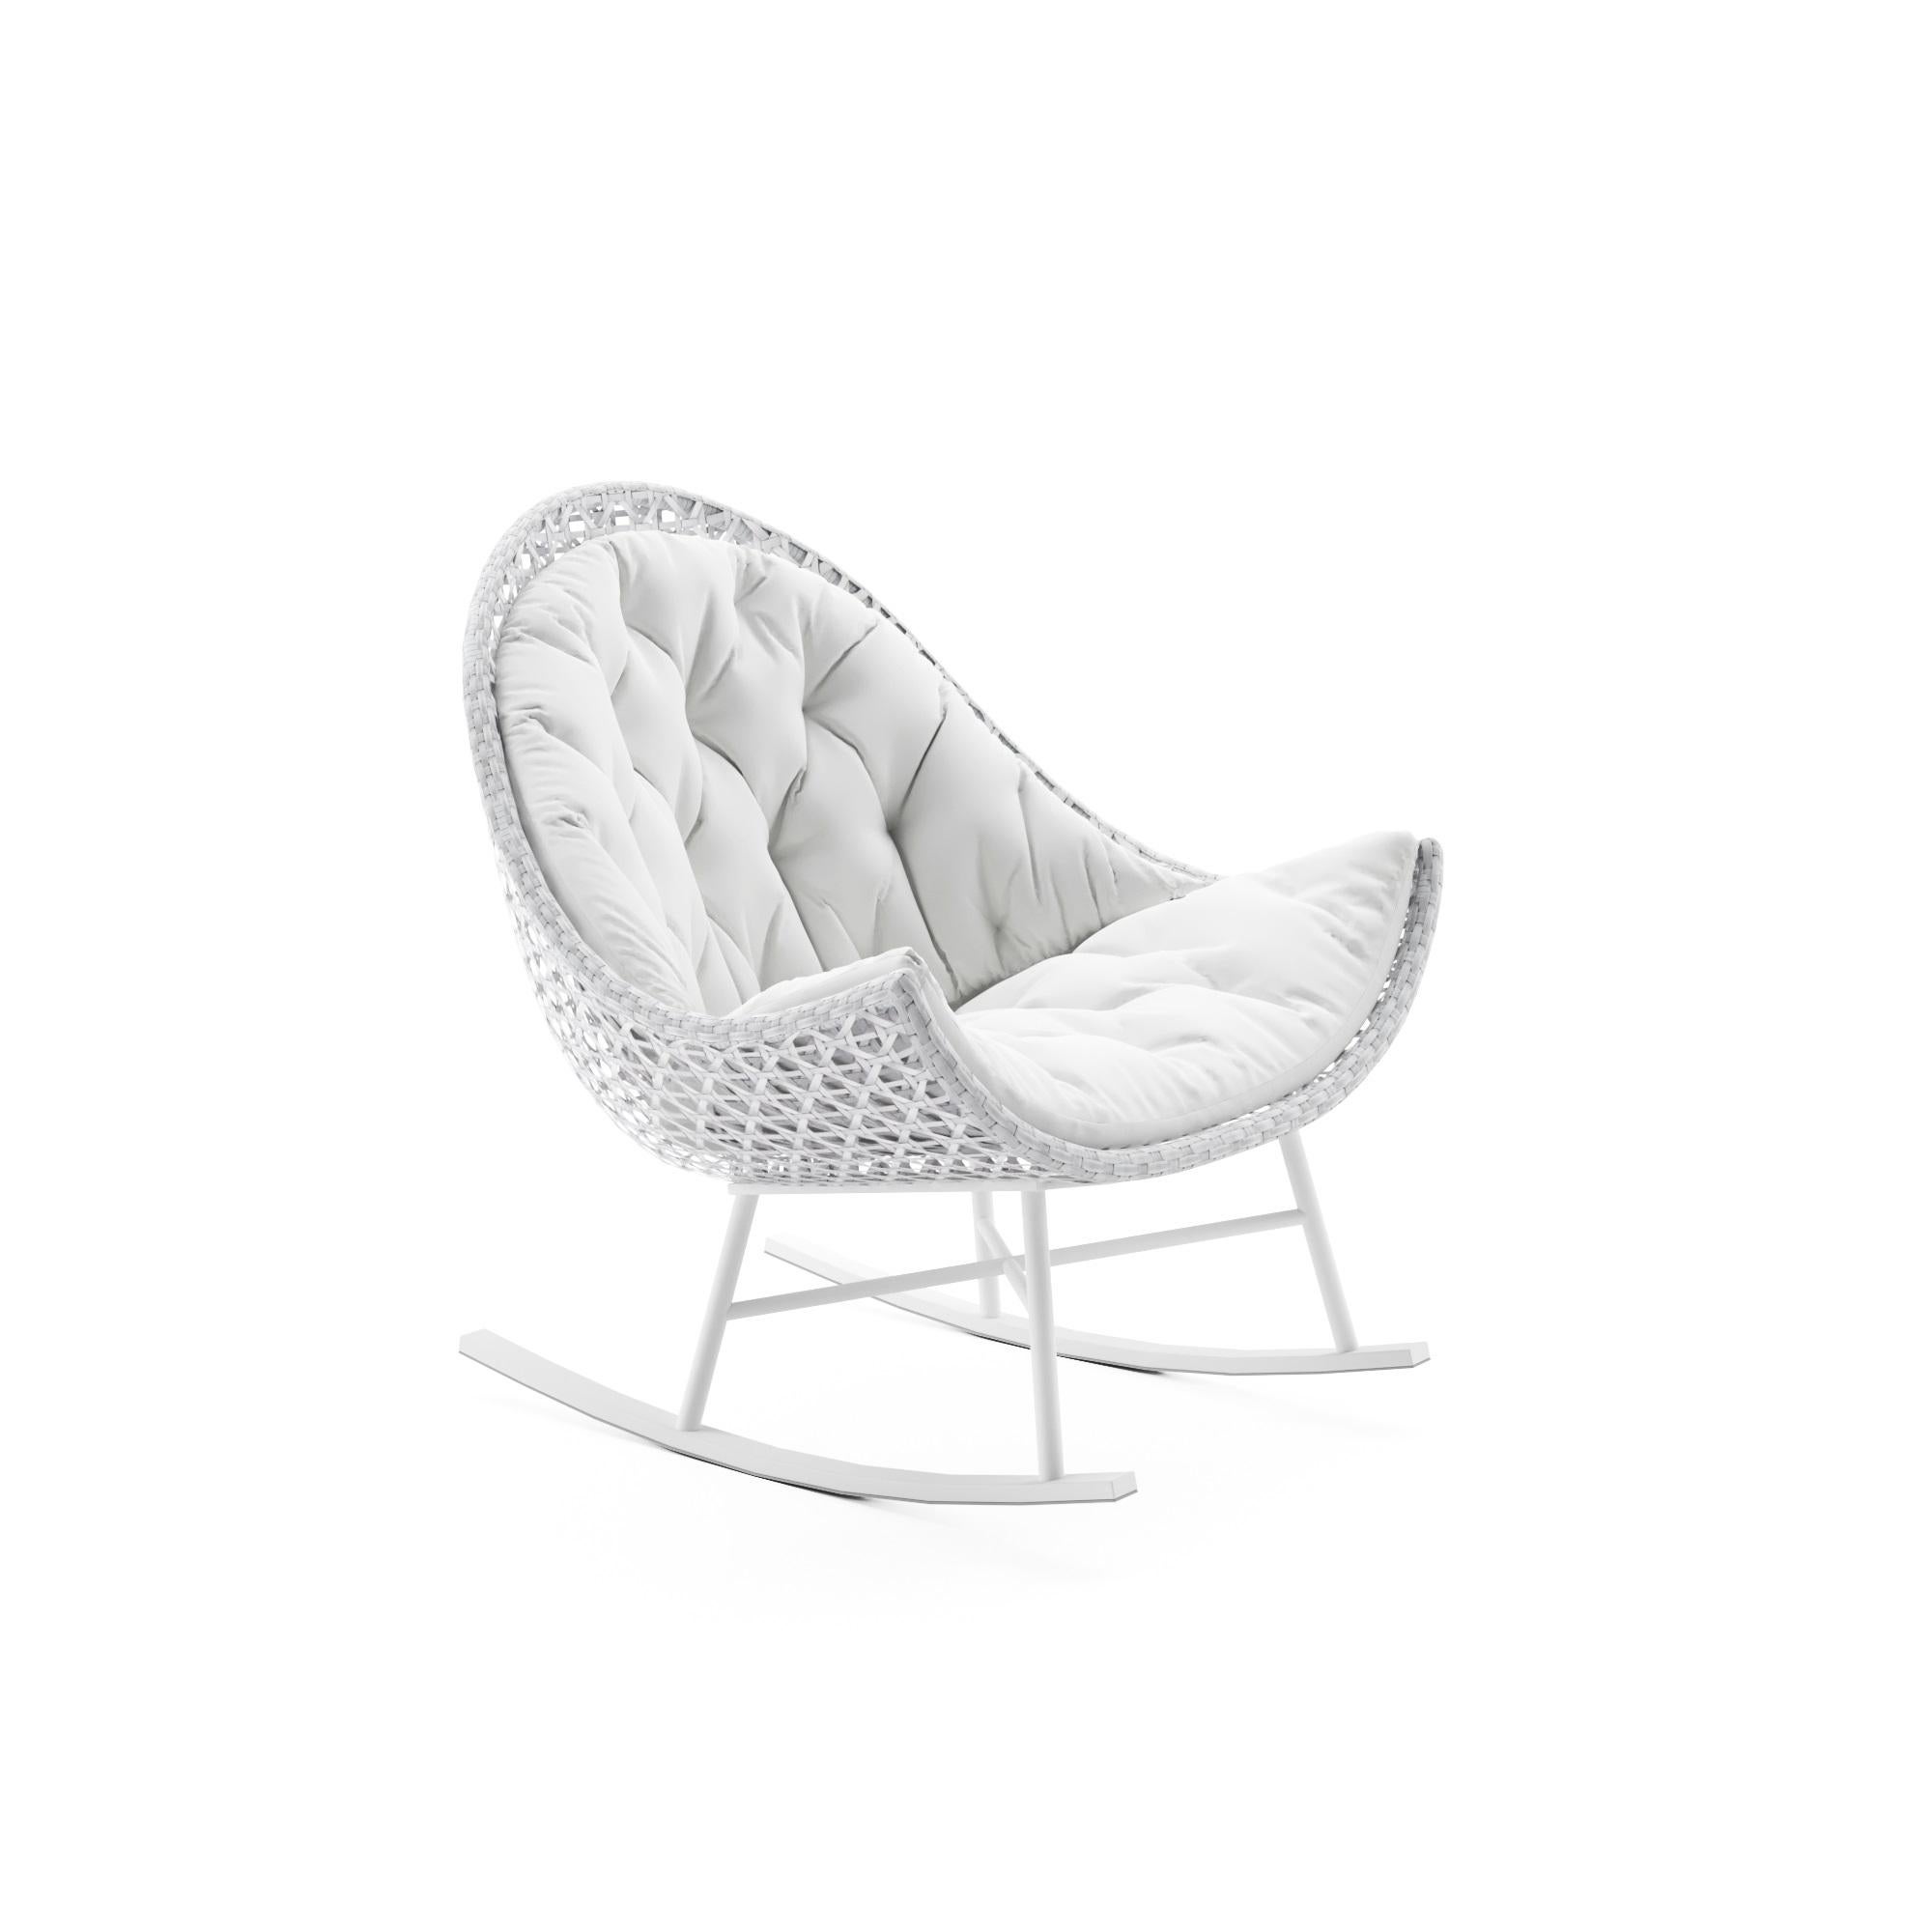 Not many furniture pieces can create a sense of total relaxation and stress release the way this rocking chairs do. The combined use of two different colors and the open weave technique creates the unique design of this collection. Thanks to its